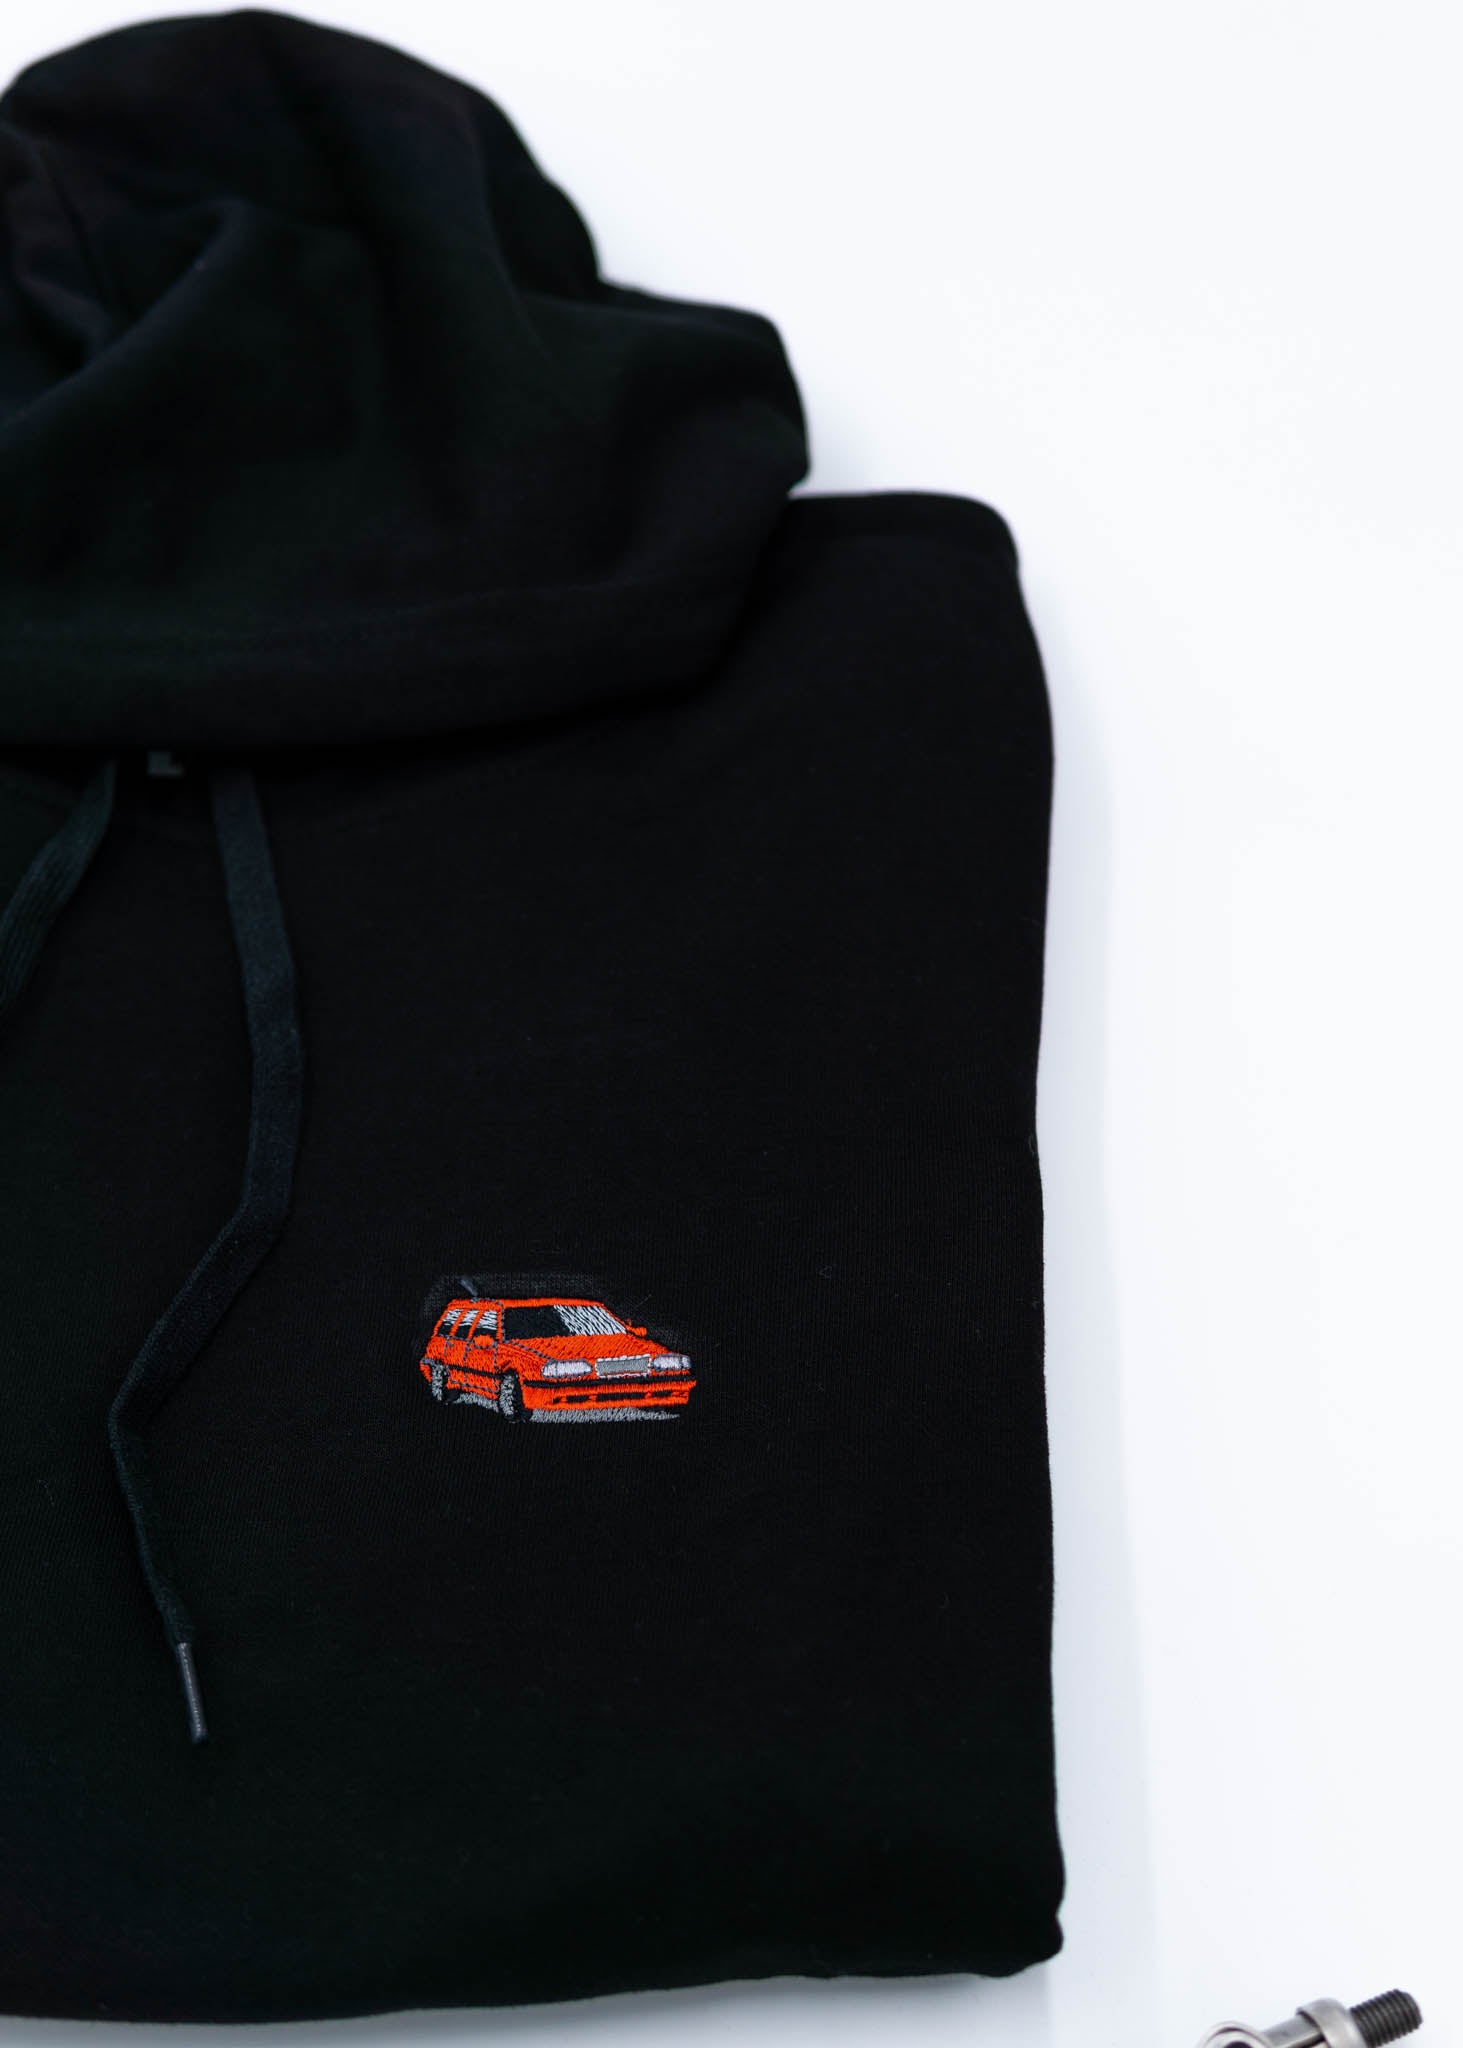 A black Volvo unisex hoodie for men and women. Photo is a close up view of the sweater with an embroidered Volvo 850R. Fabric composition is cotton, polyester, and rayon. The material is very soft, stretchy, and non-transparent. The style of this hoodie is long sleeve, crewneck with a hood, hooded, with embroidery on the left chest.